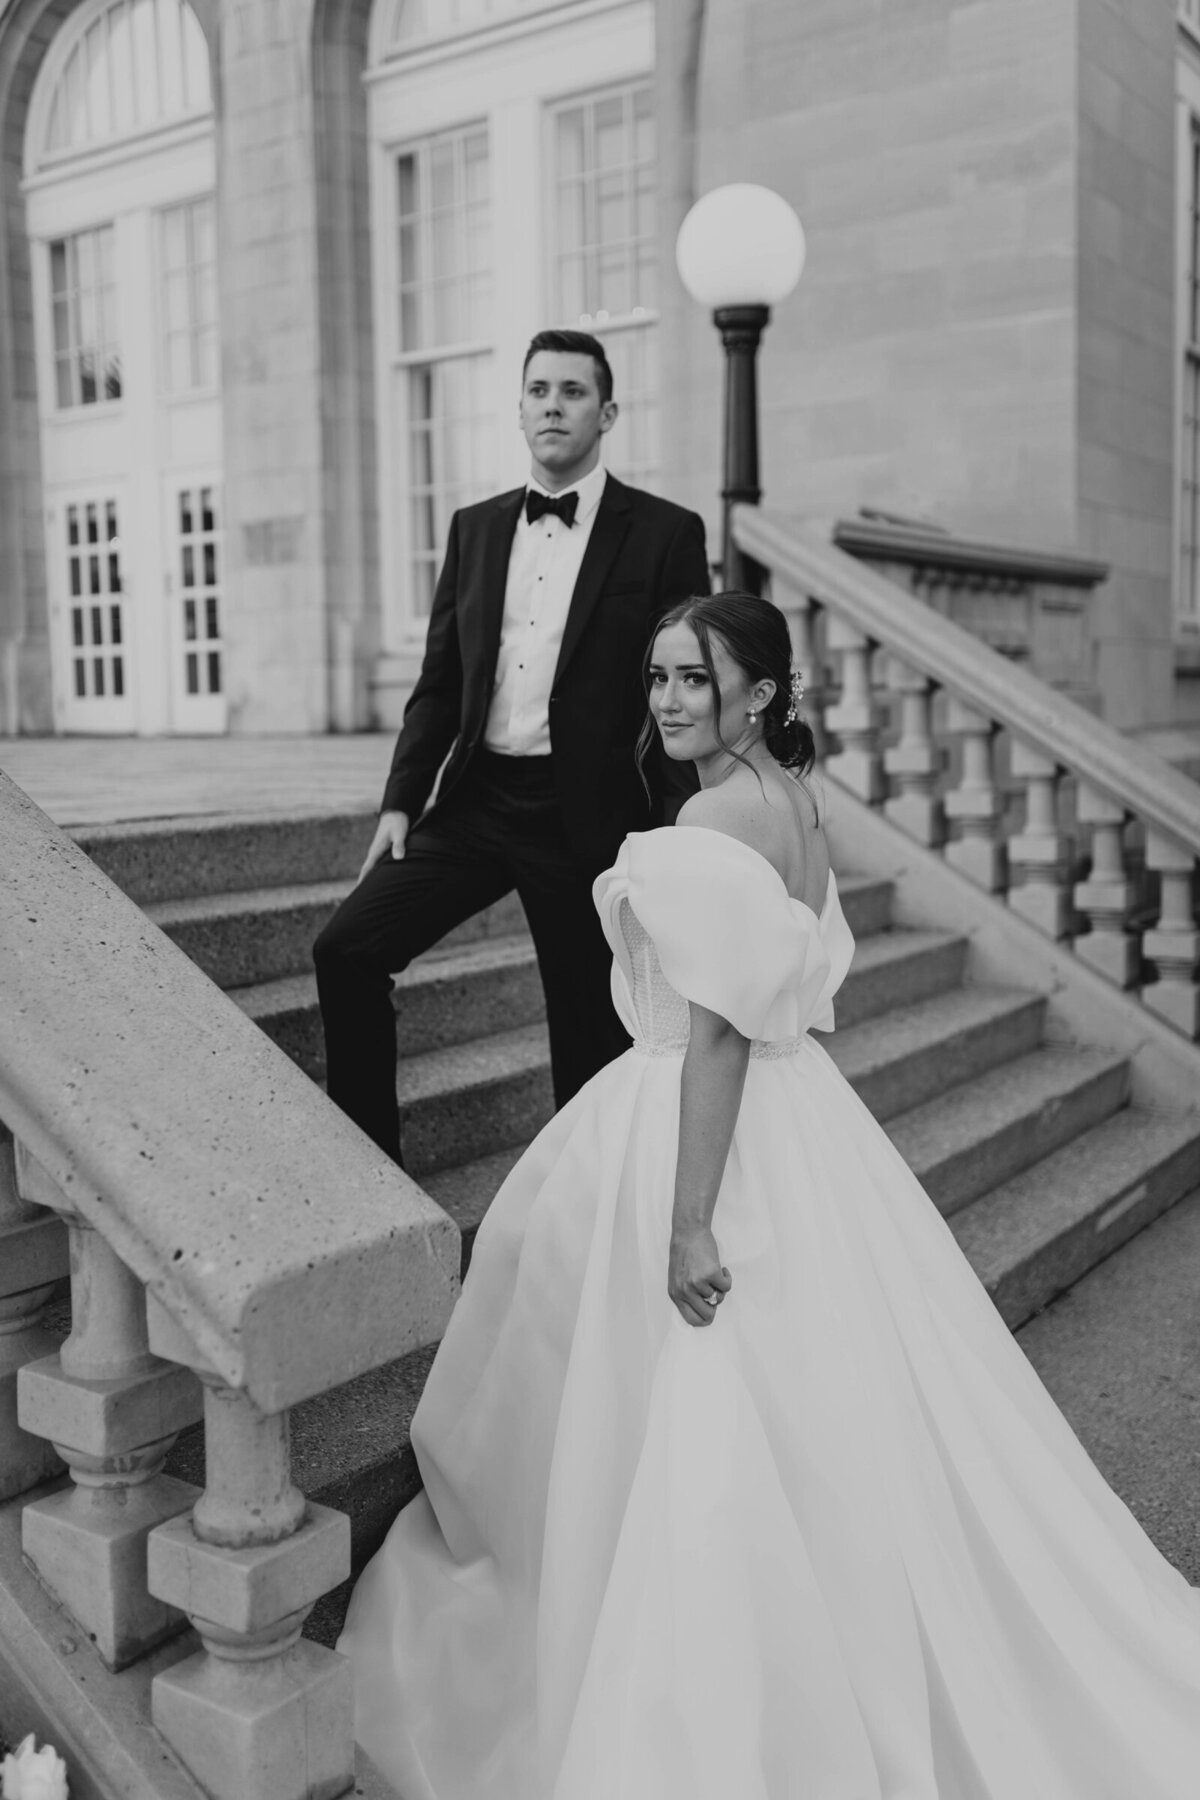 Black and white photo of a bride and groom posing on stairway.